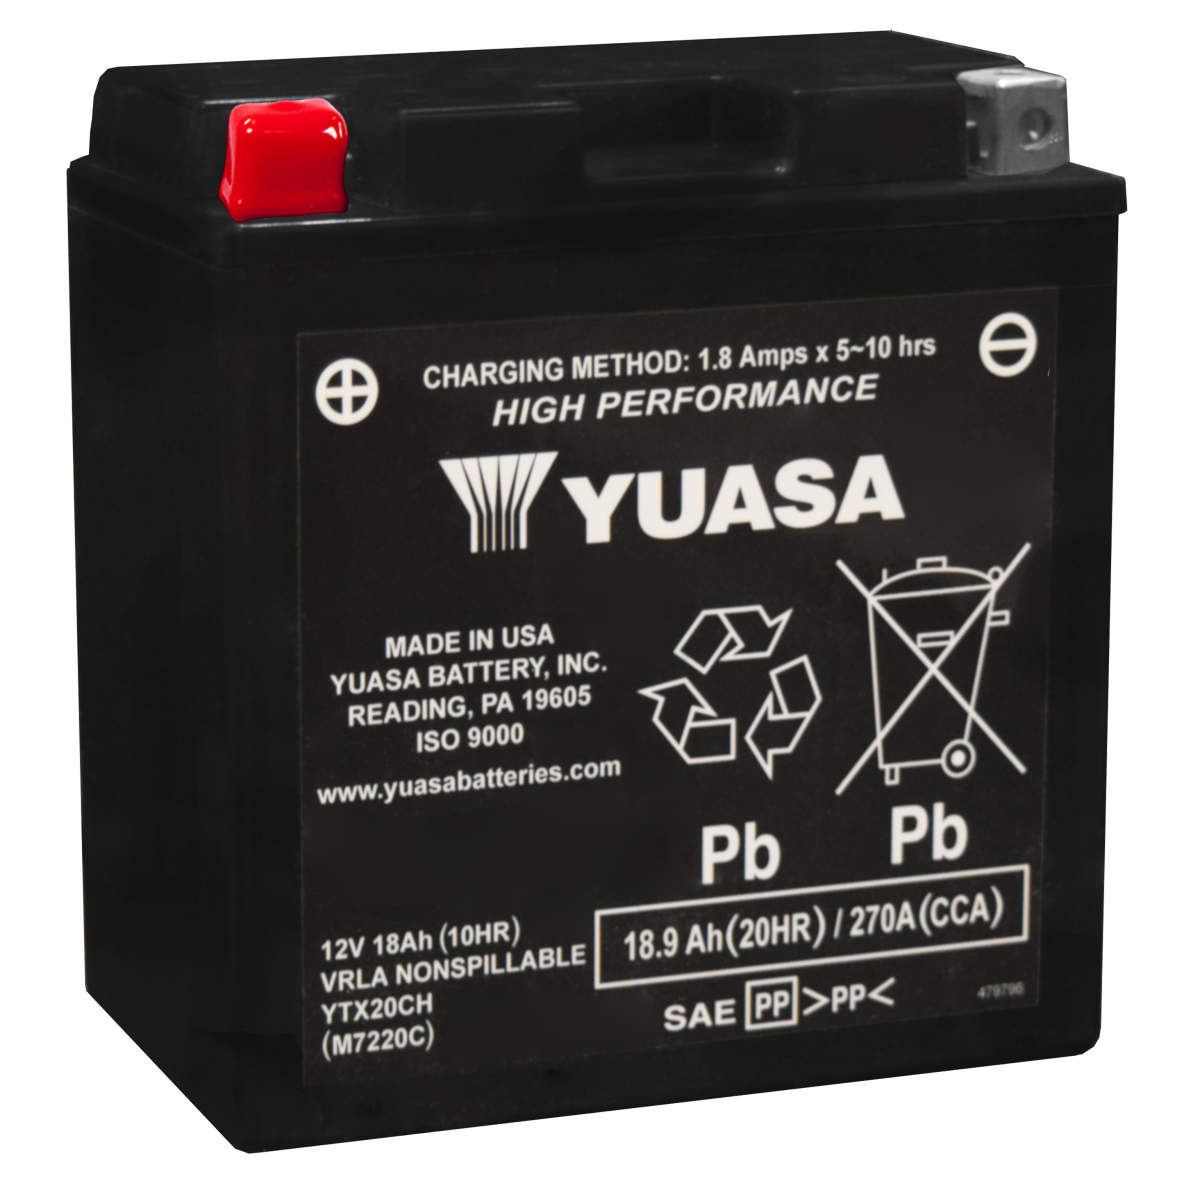 Yuasa YTX20CH 270CCA High Performance AGM powersports and motorcycle battery